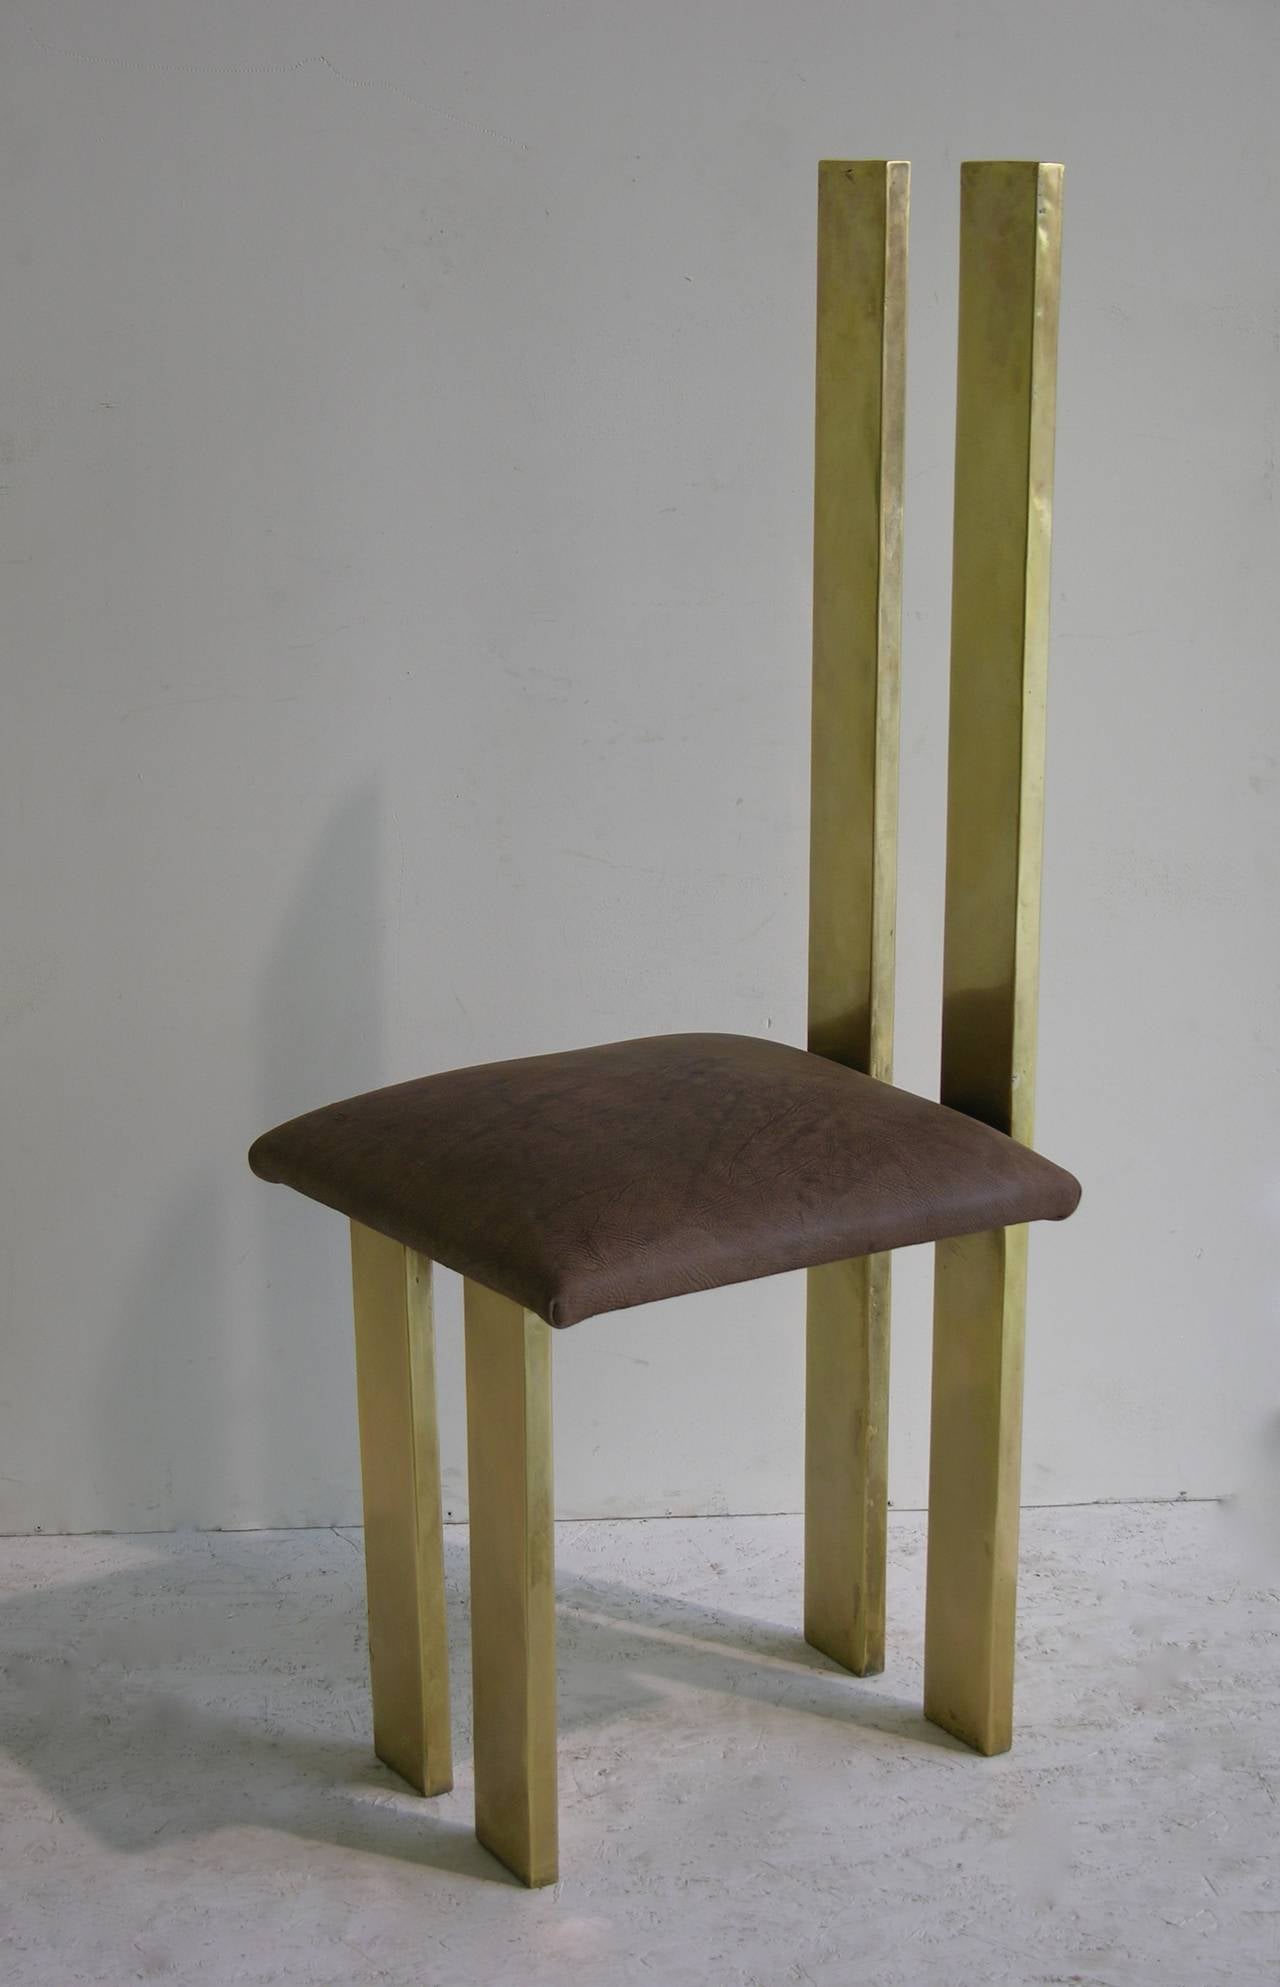 Forged Sandro Petti 1970s Remarkable Italian Minimalist Pair of Sculptural Chairs